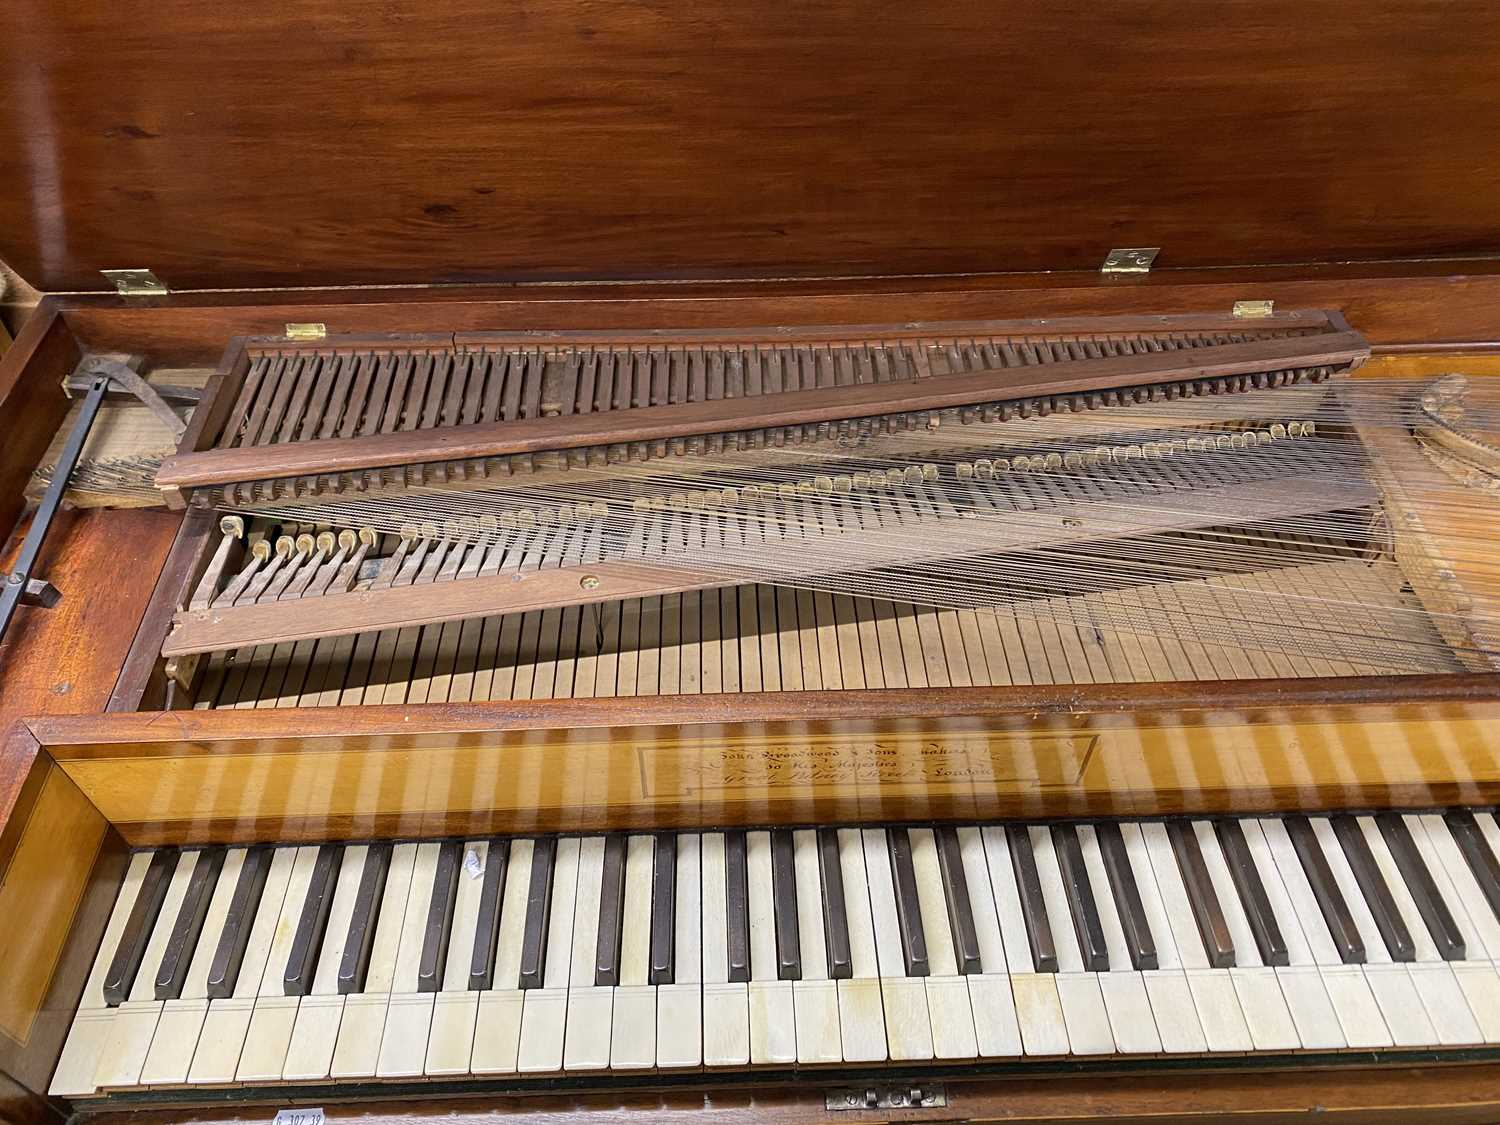 John Broadwood & Sons Makers, Great Putney Street, London, a 19th Century spinet or square piano set - Image 6 of 7